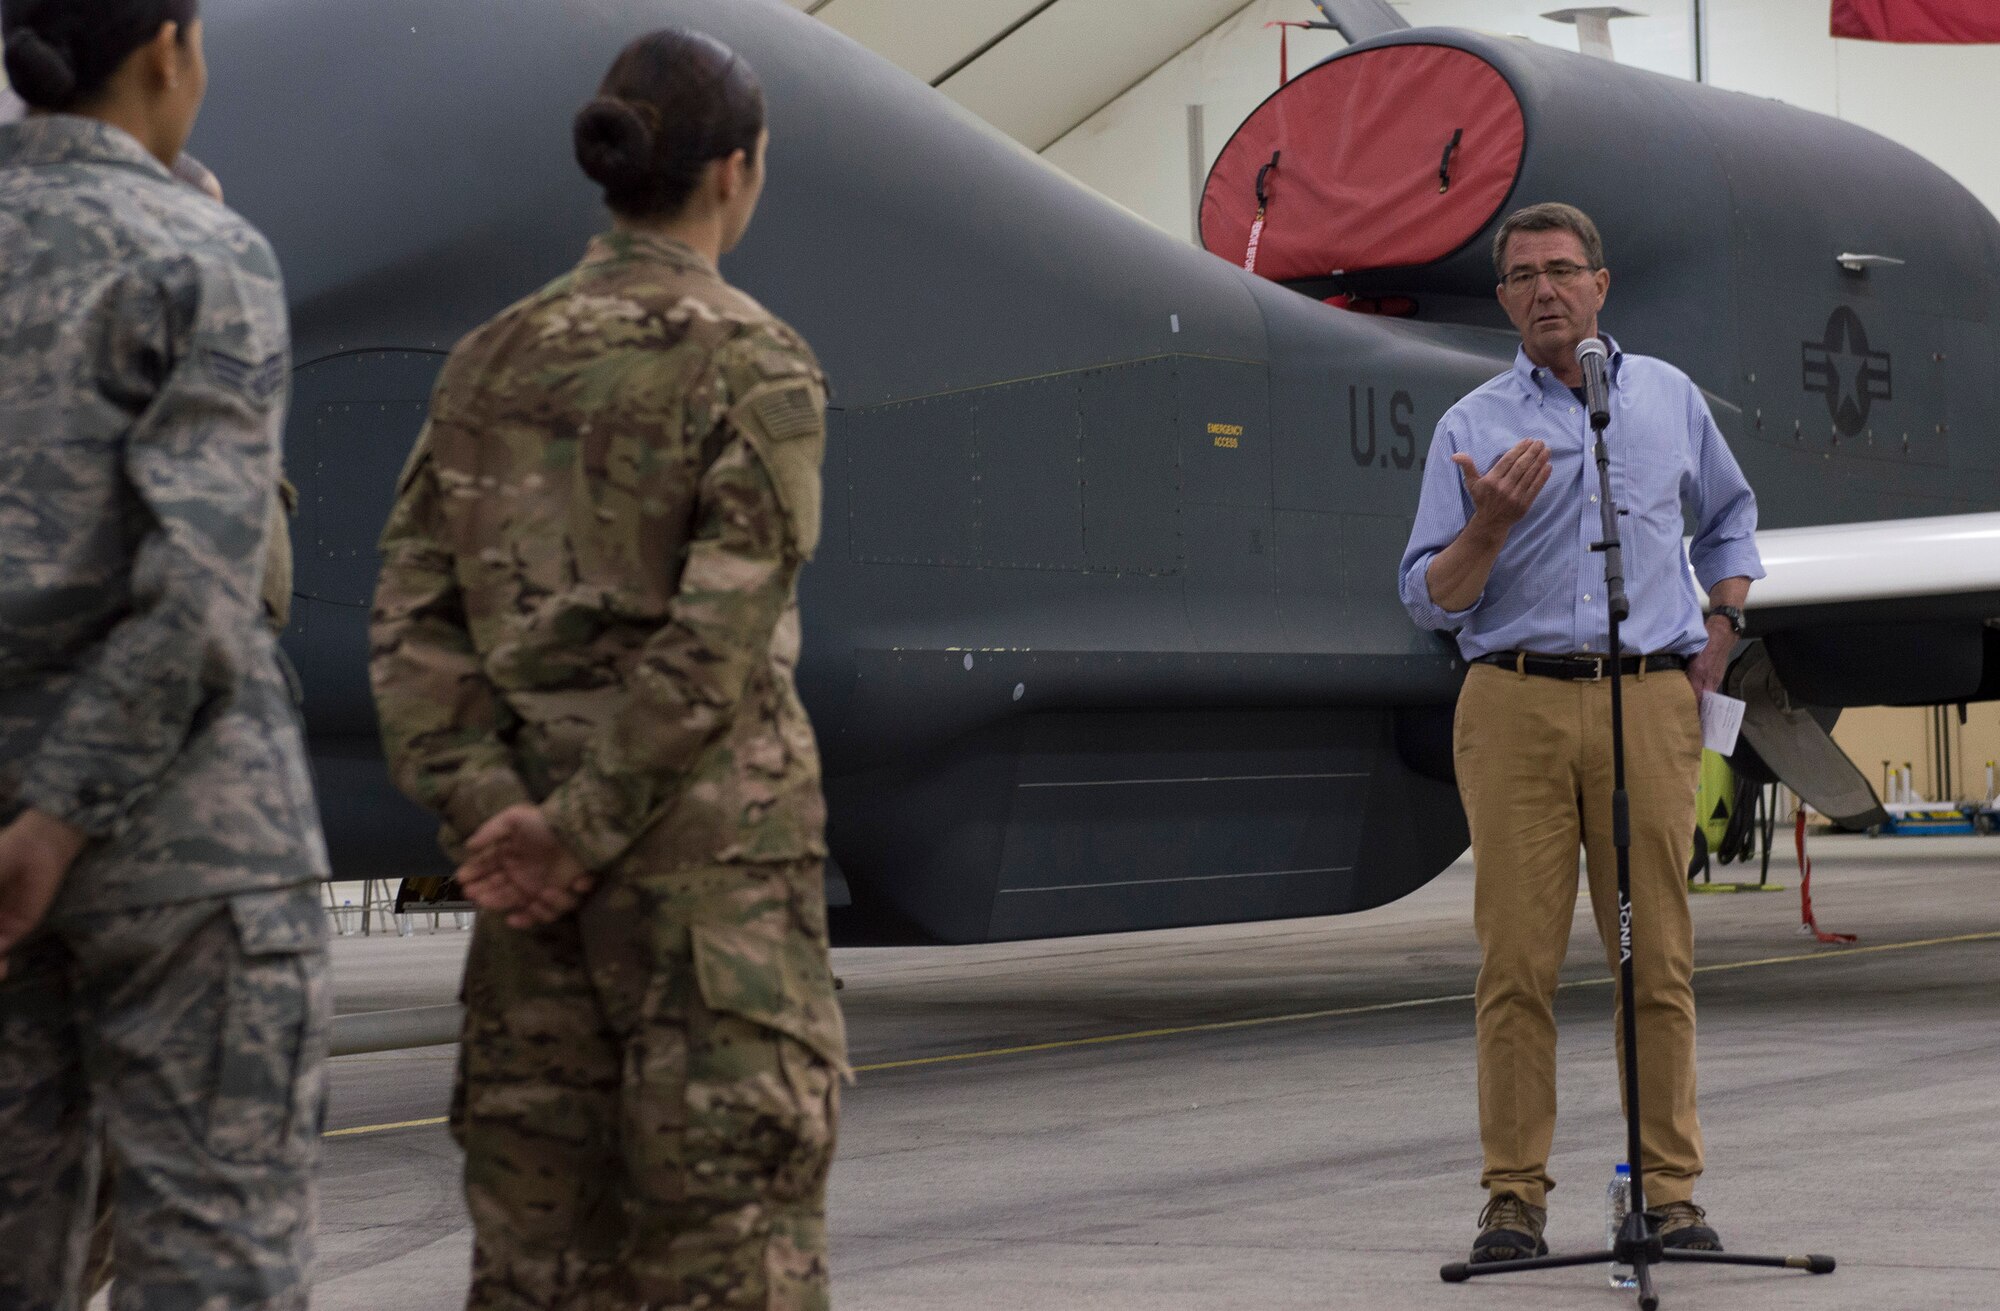 U.S. Secretary of Defense Ash Carter speaks to U.S. and coalition forces at an undisclosed location in Southwest Asia, April 16, 2016. Secretary Carter spoke with the service members about the importance of their role in accelerating the lasting defeat of ISIL. (U.S. Air Force photo by Staff Sgt. Chad Warren)